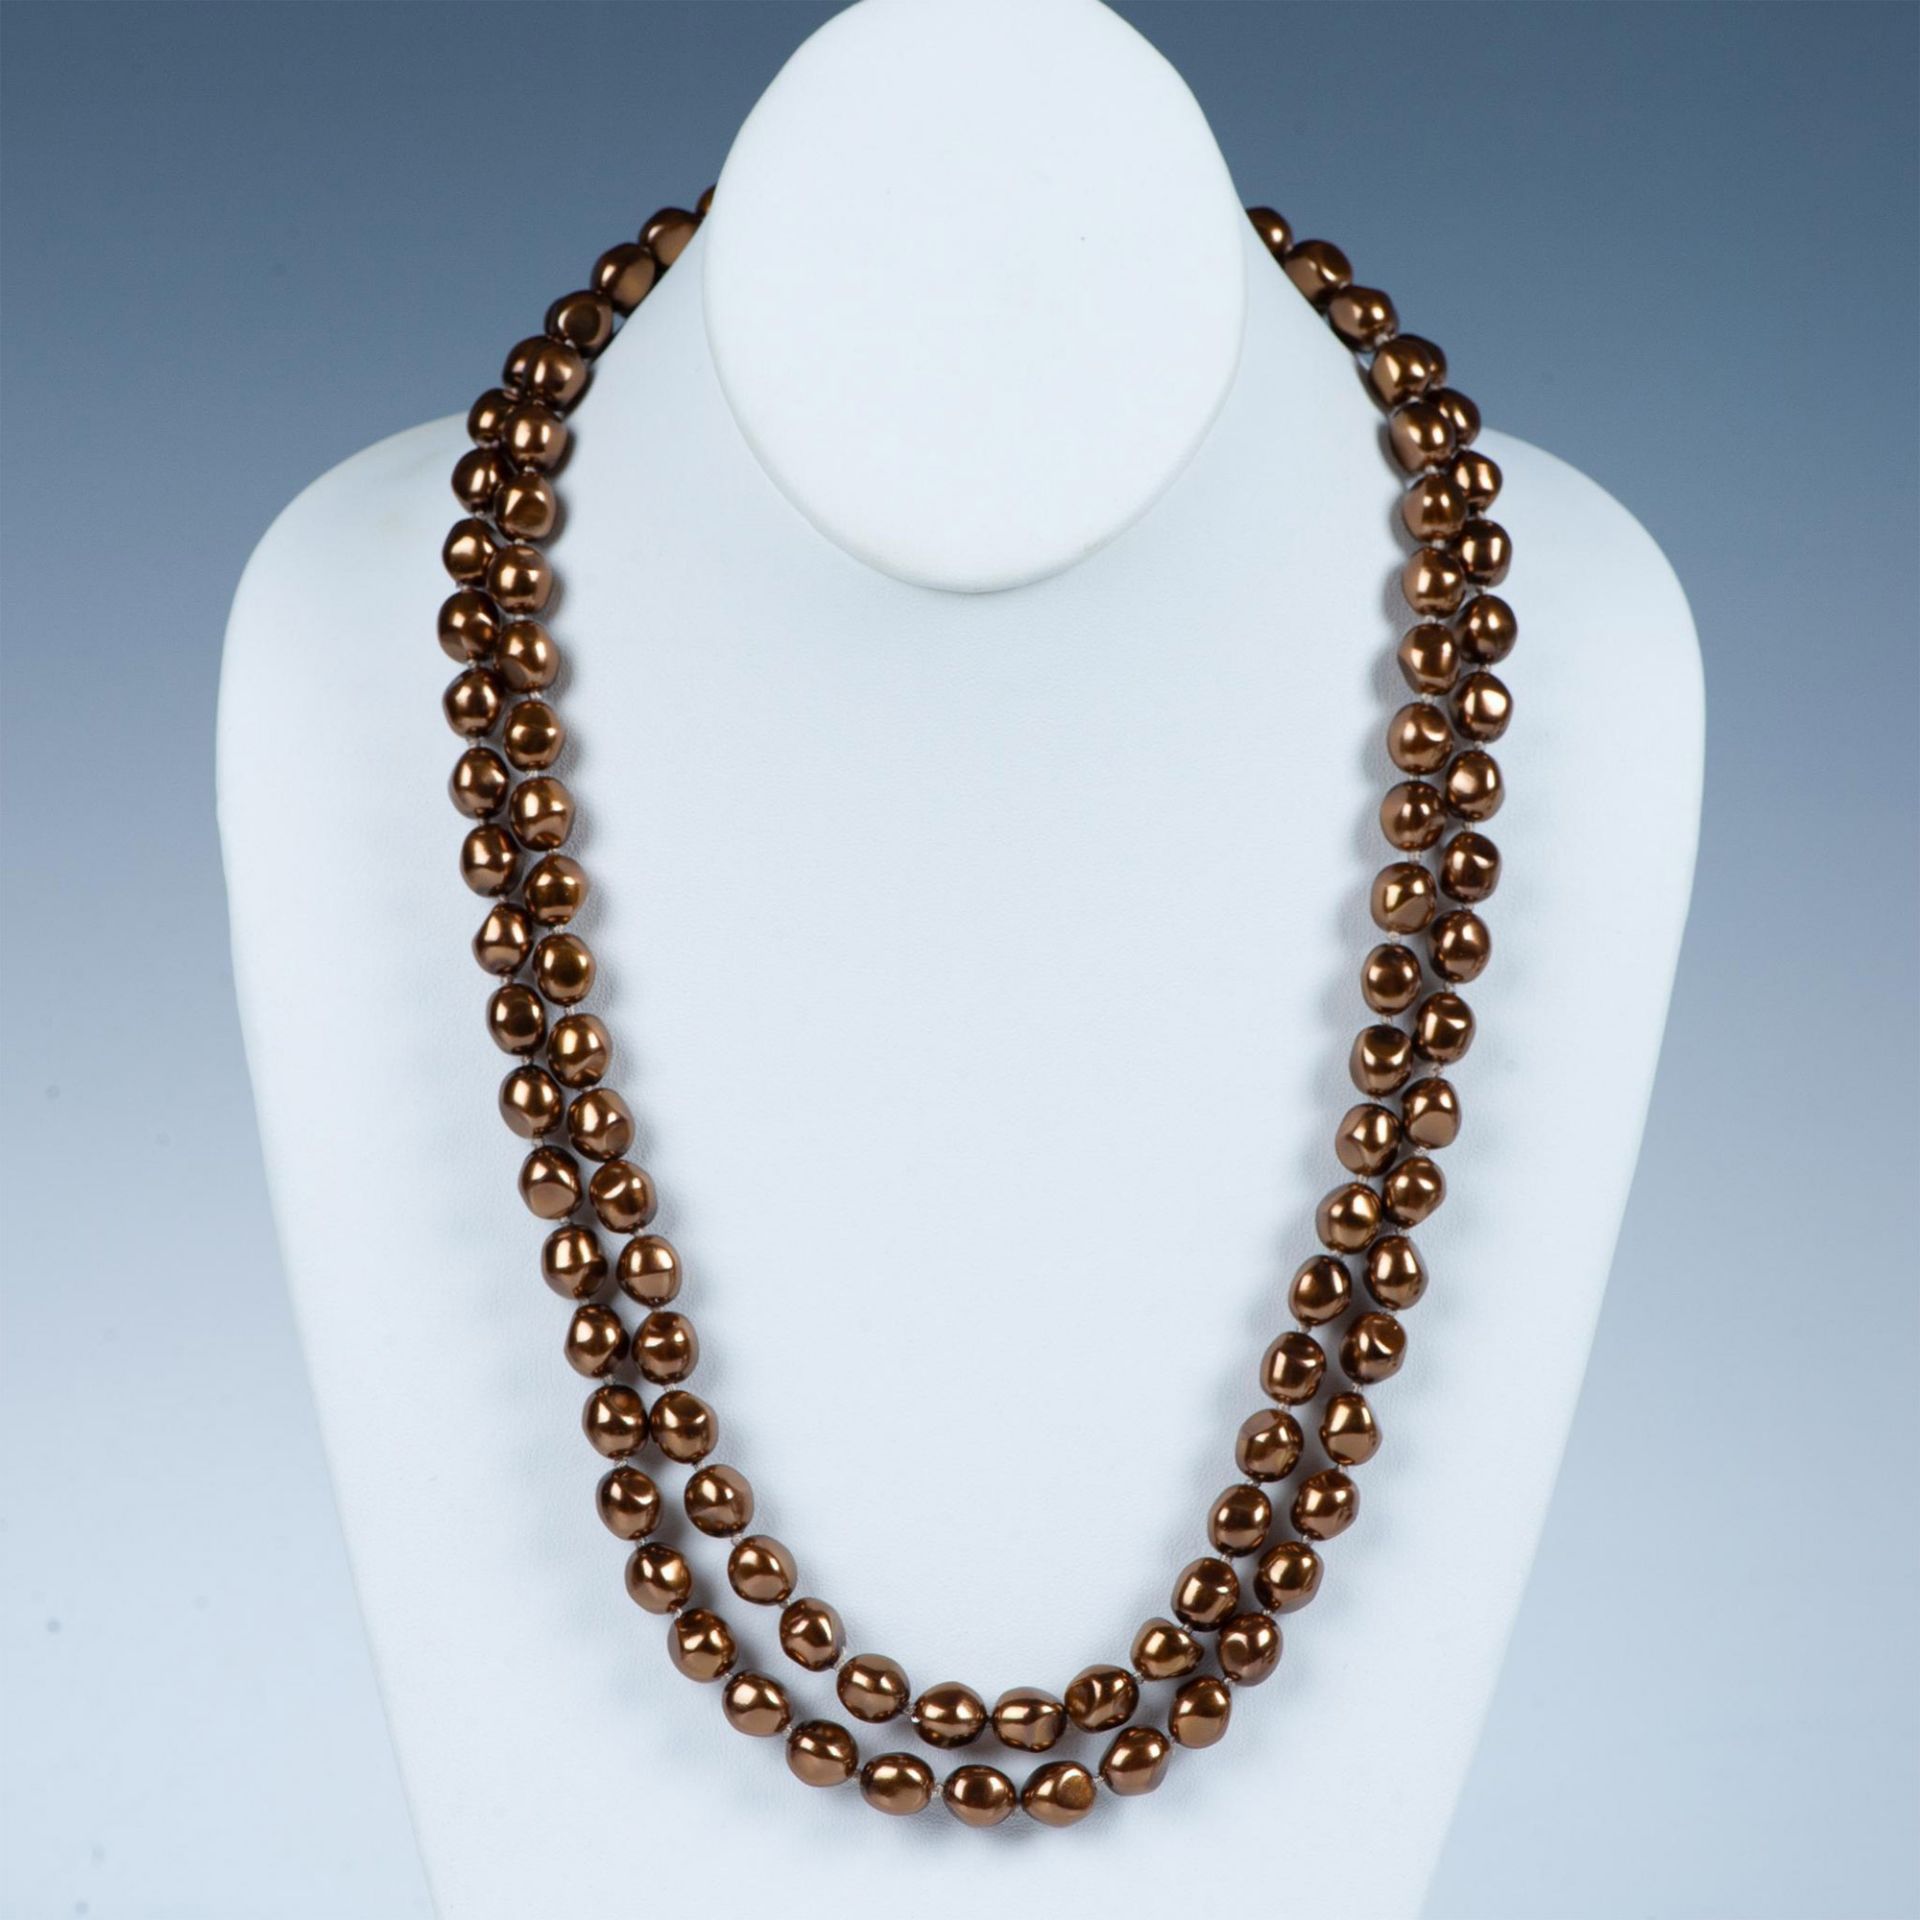 2pc Bronze Faux Baroque Pearl Necklaces - Image 4 of 7